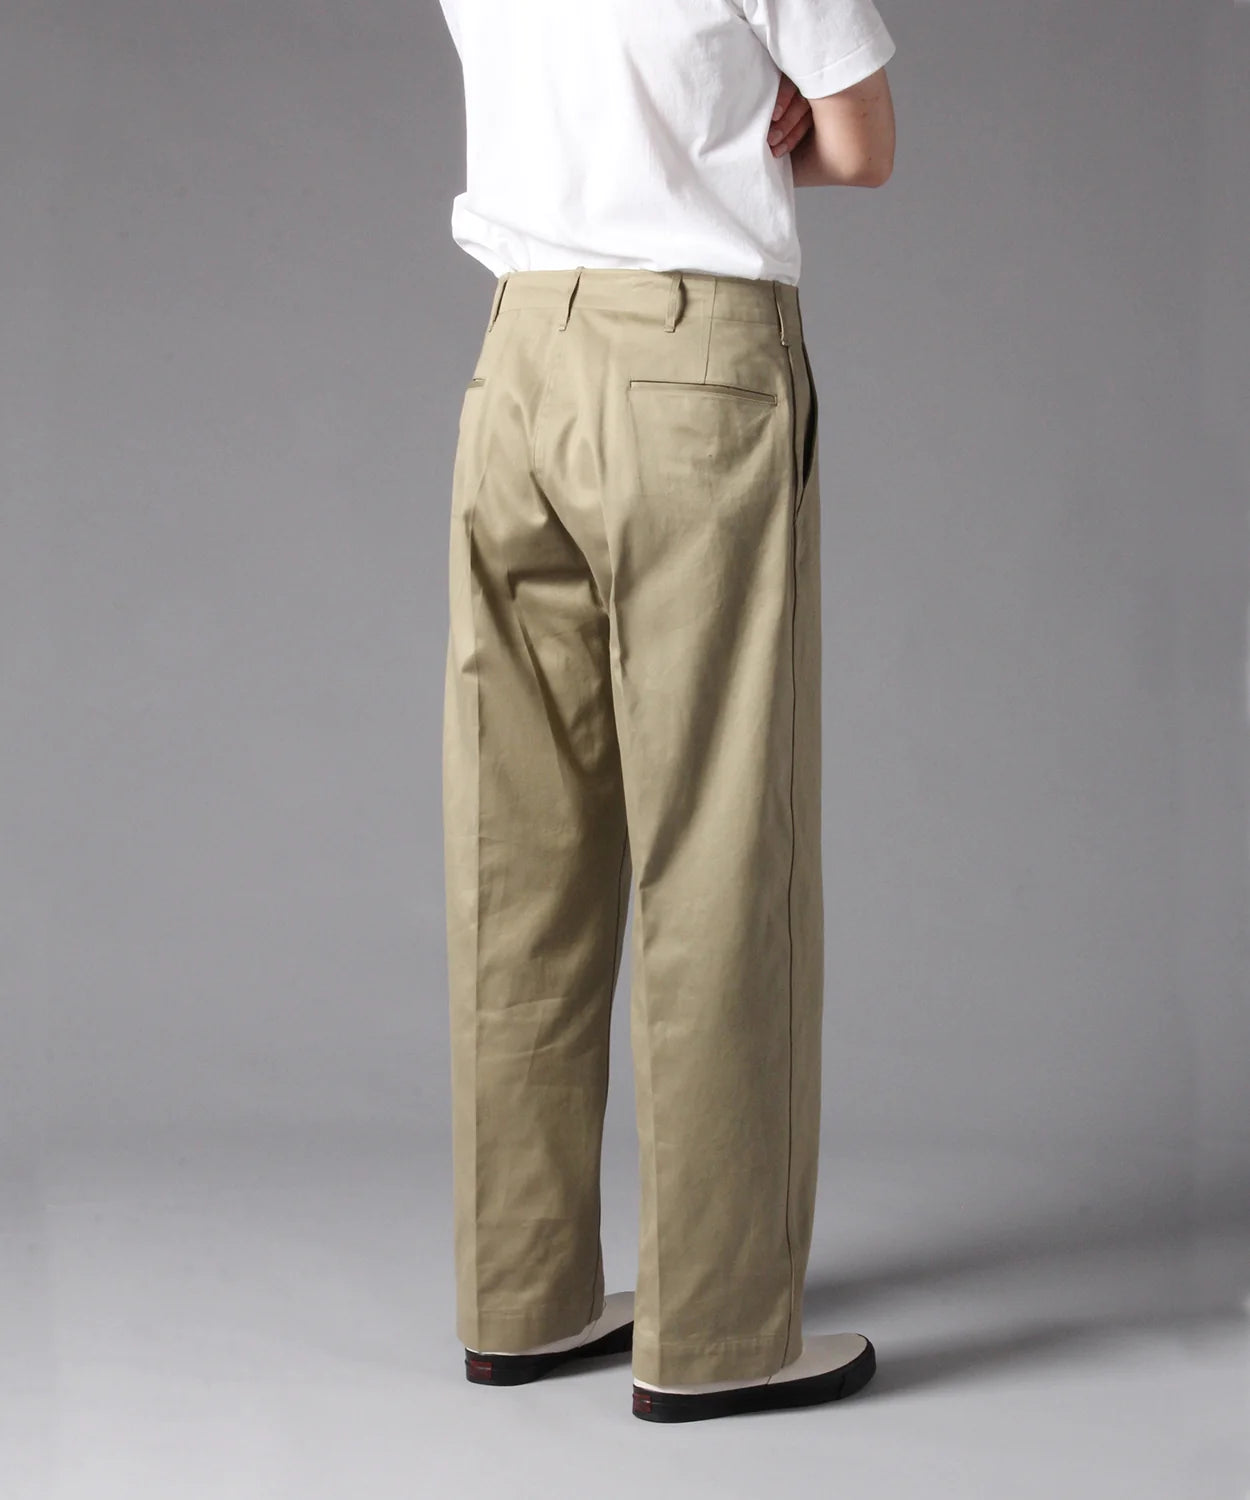 M1945 TROUSERS WEST POINT – ANATOMICA AOYAMA